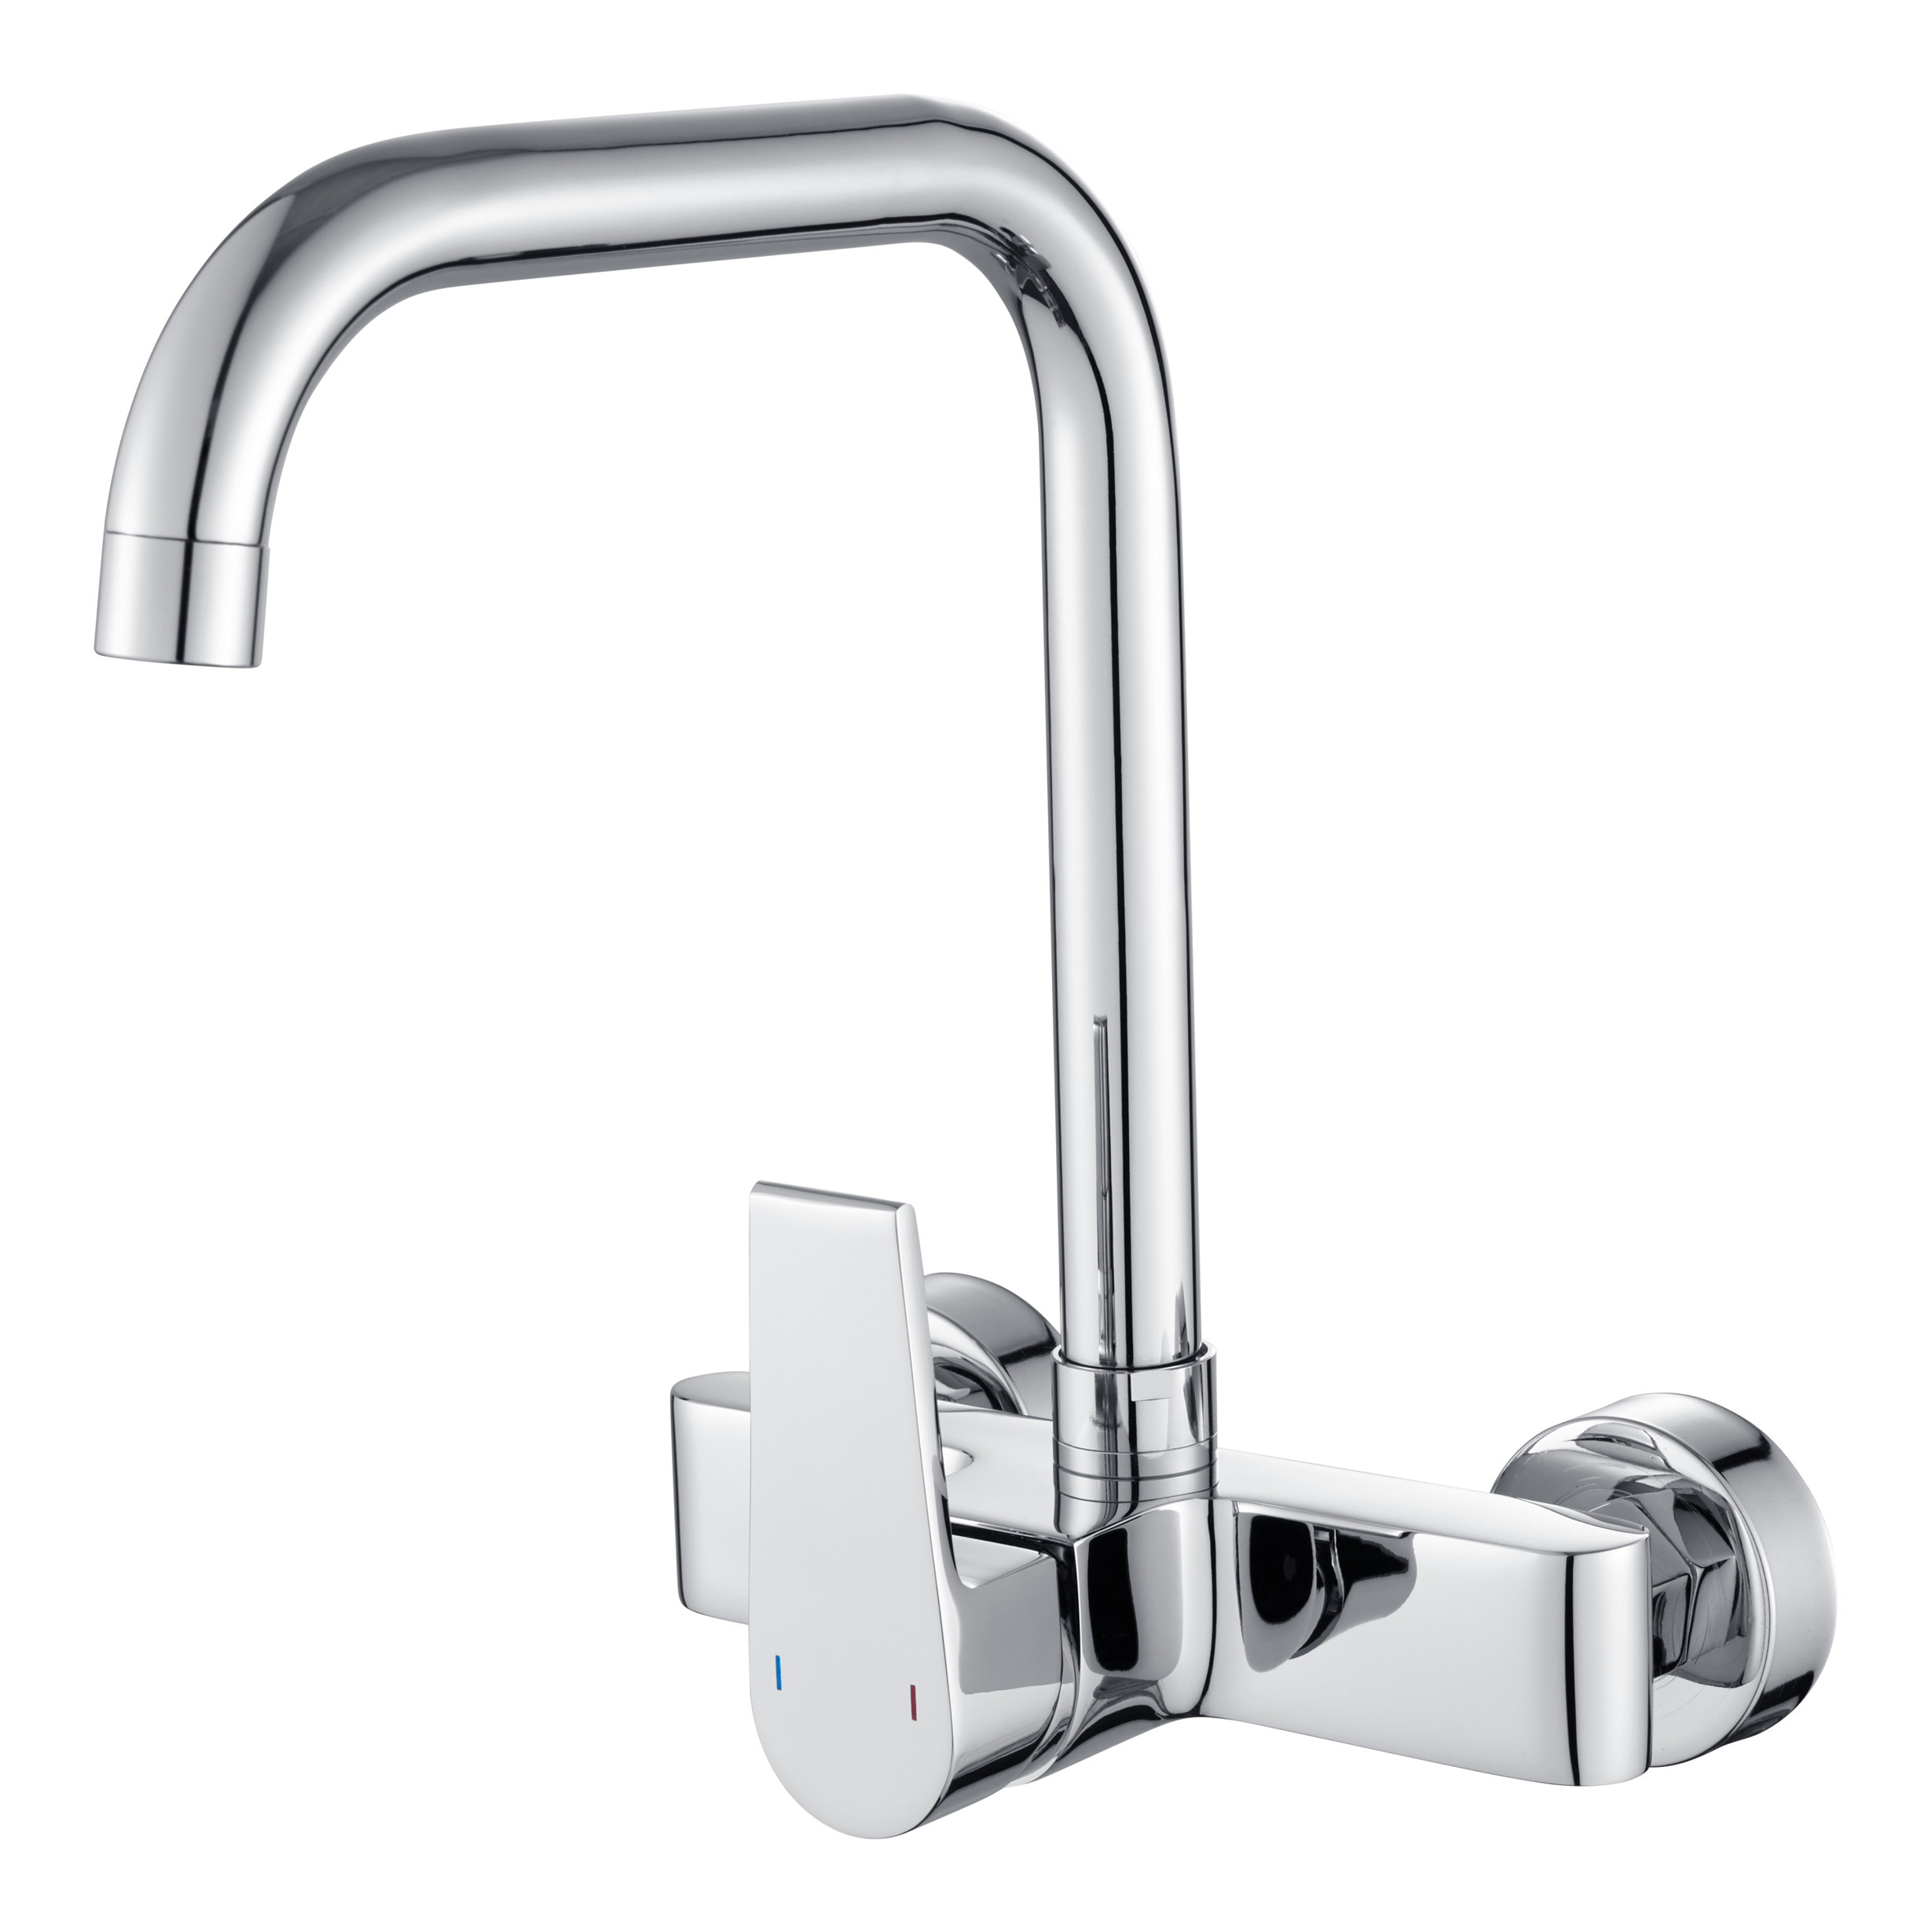 MARQUIS Wall Mounted Sink Mixer- F30005